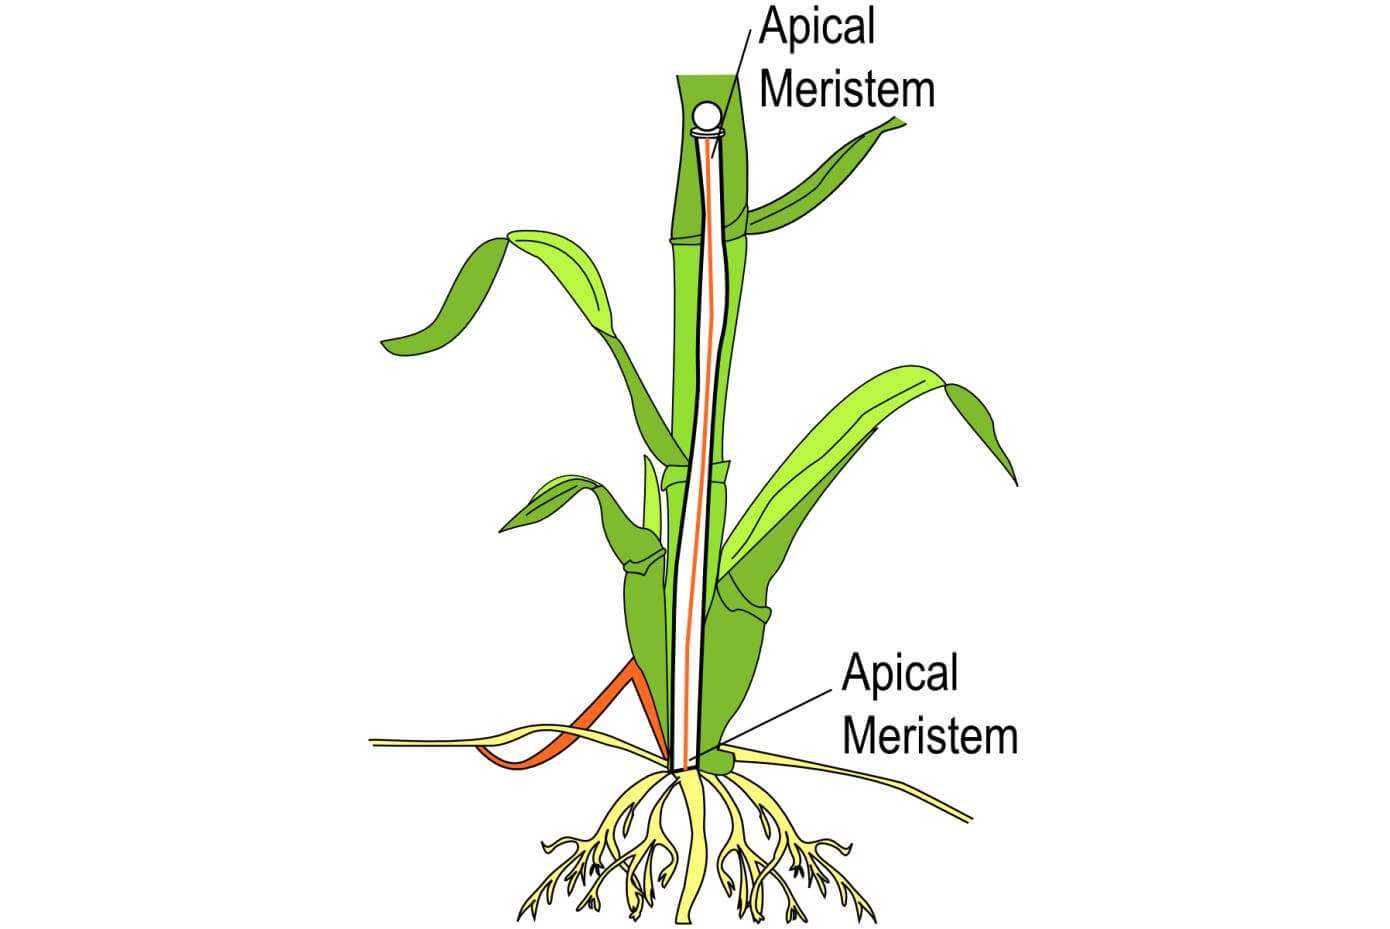 Illustration showing the flowering process of a grass plant.